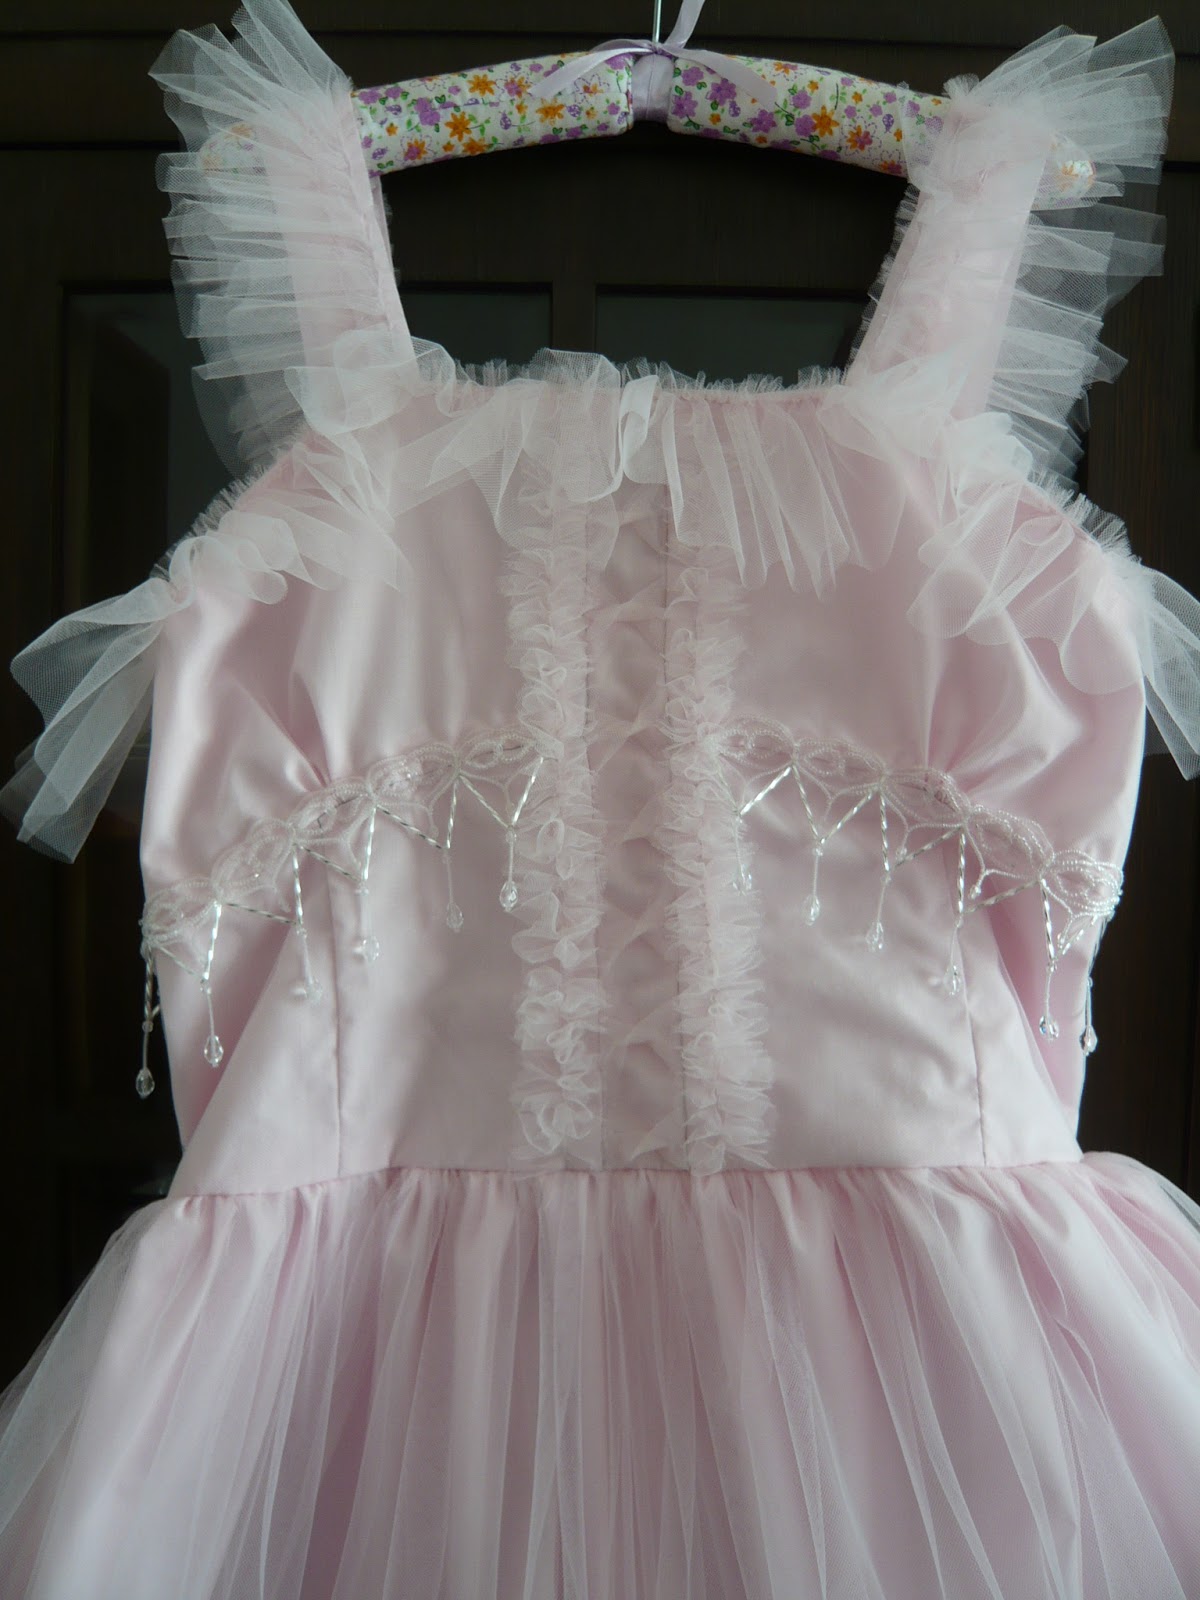 Pink Meringue Dress is Finished! - Dollhouse Diaries